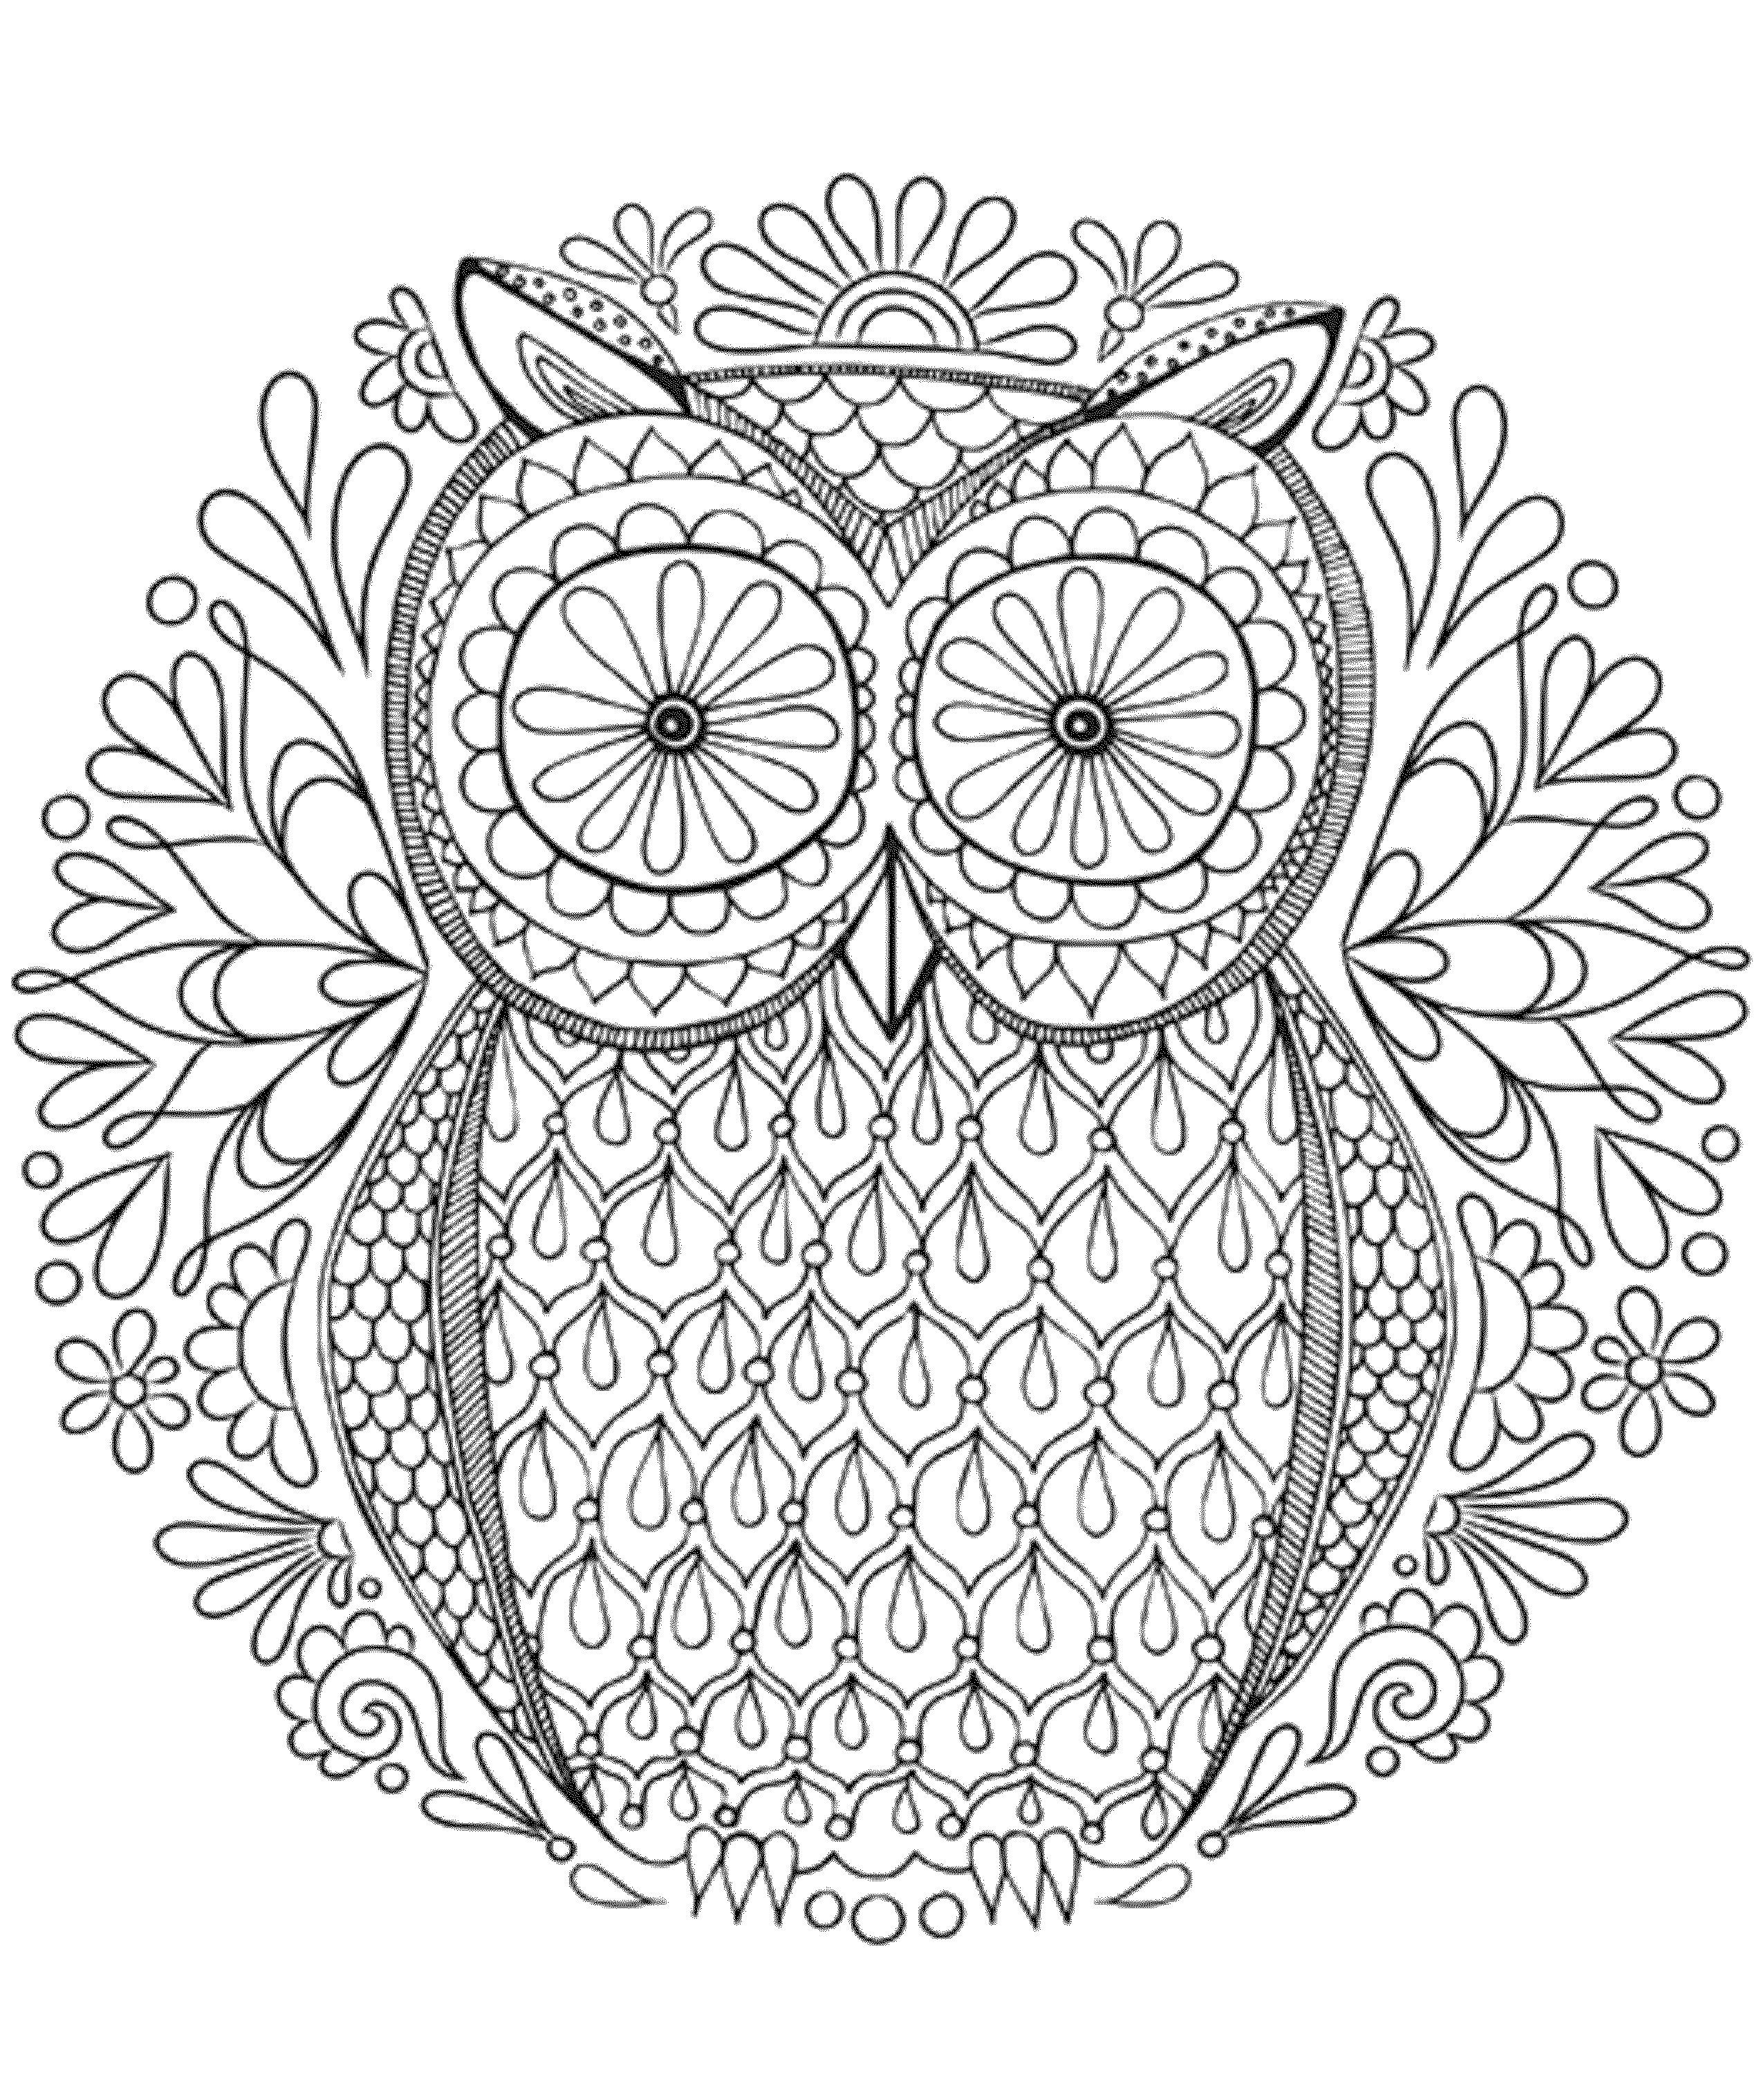 Online Coloring Pages For Adults
 Hard Coloring Pages for Adults Best Coloring Pages For Kids